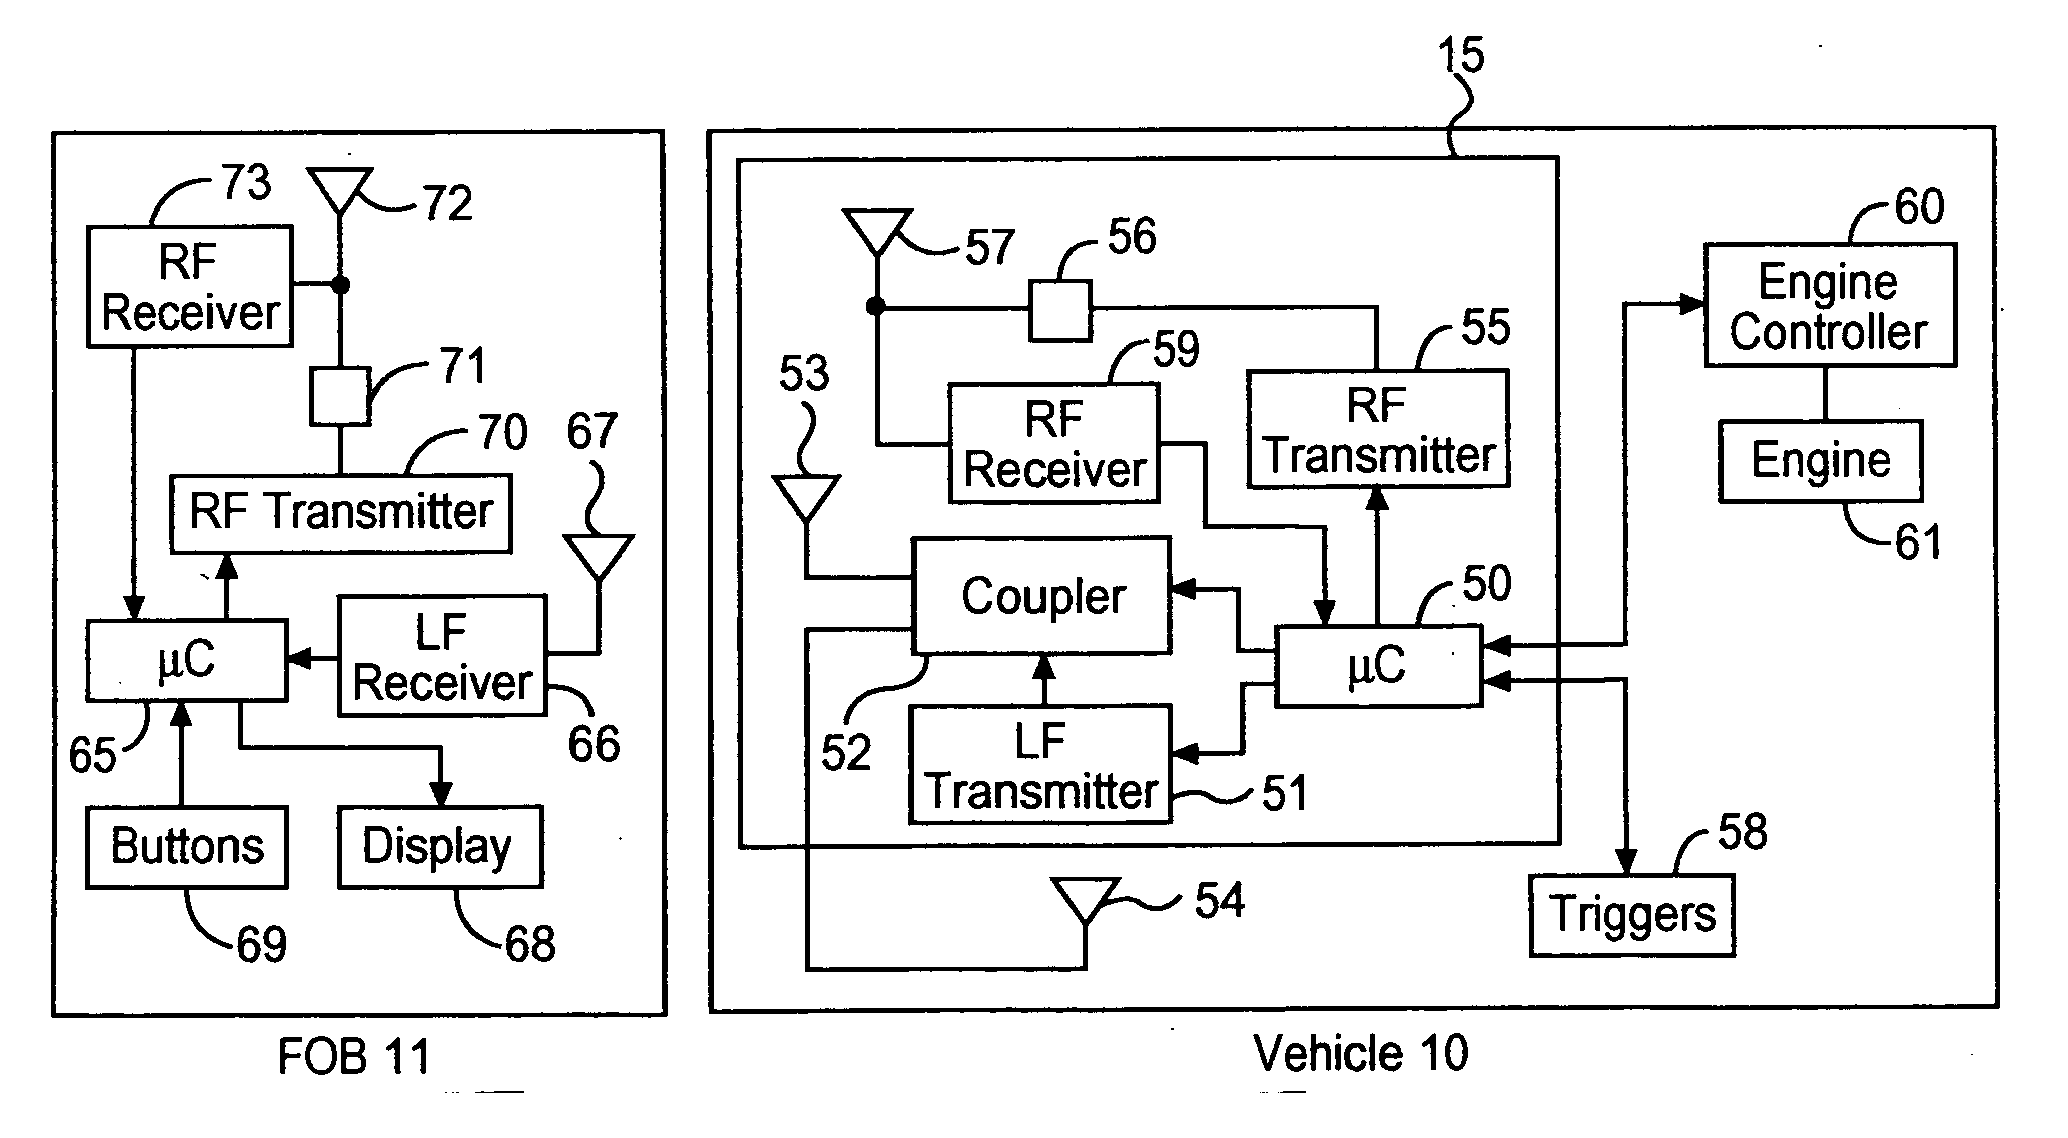 Transmit antenna multiplexing for vehicular passive entry systems